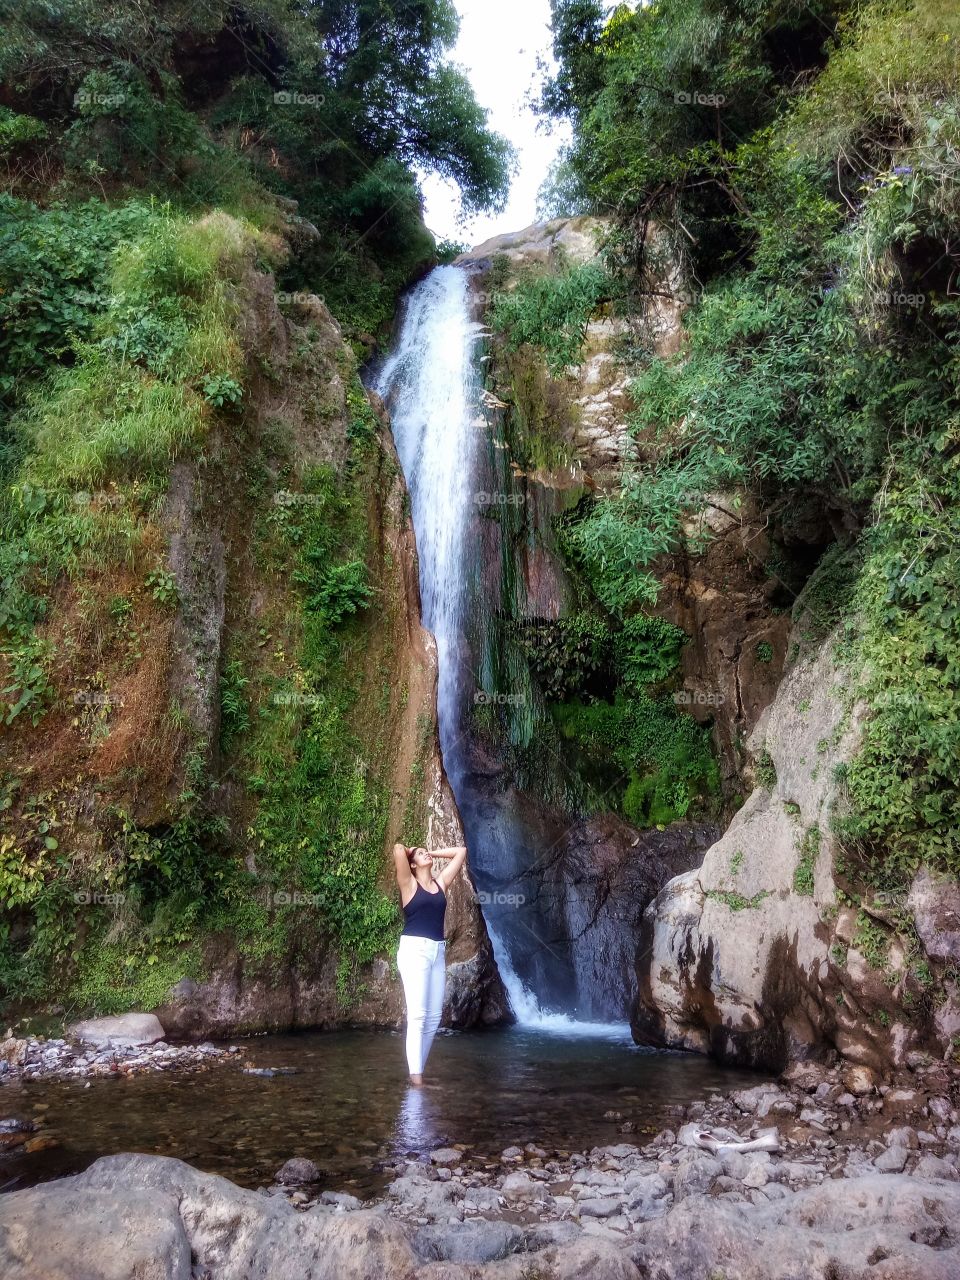 Waterfall Feels❤😋
#igers 🔝 😊 #travel #love #explore #instagood #thegoodmoments #happiness #waterfall #wanderlust #travelgram #like4like #likeforlike #waterfall #instago #tranquility 😋👀 #photography #mussorie 
#happyvibes 💜💋👅💕🙈 #romantacism 😋 #shoutout #love 🐒💋 #peace 😋🙌💕 #uttarakhand #dehradun 😎😇💟 #obsession 😎😋😇😬 #candid #SFL 💞
#community #foap